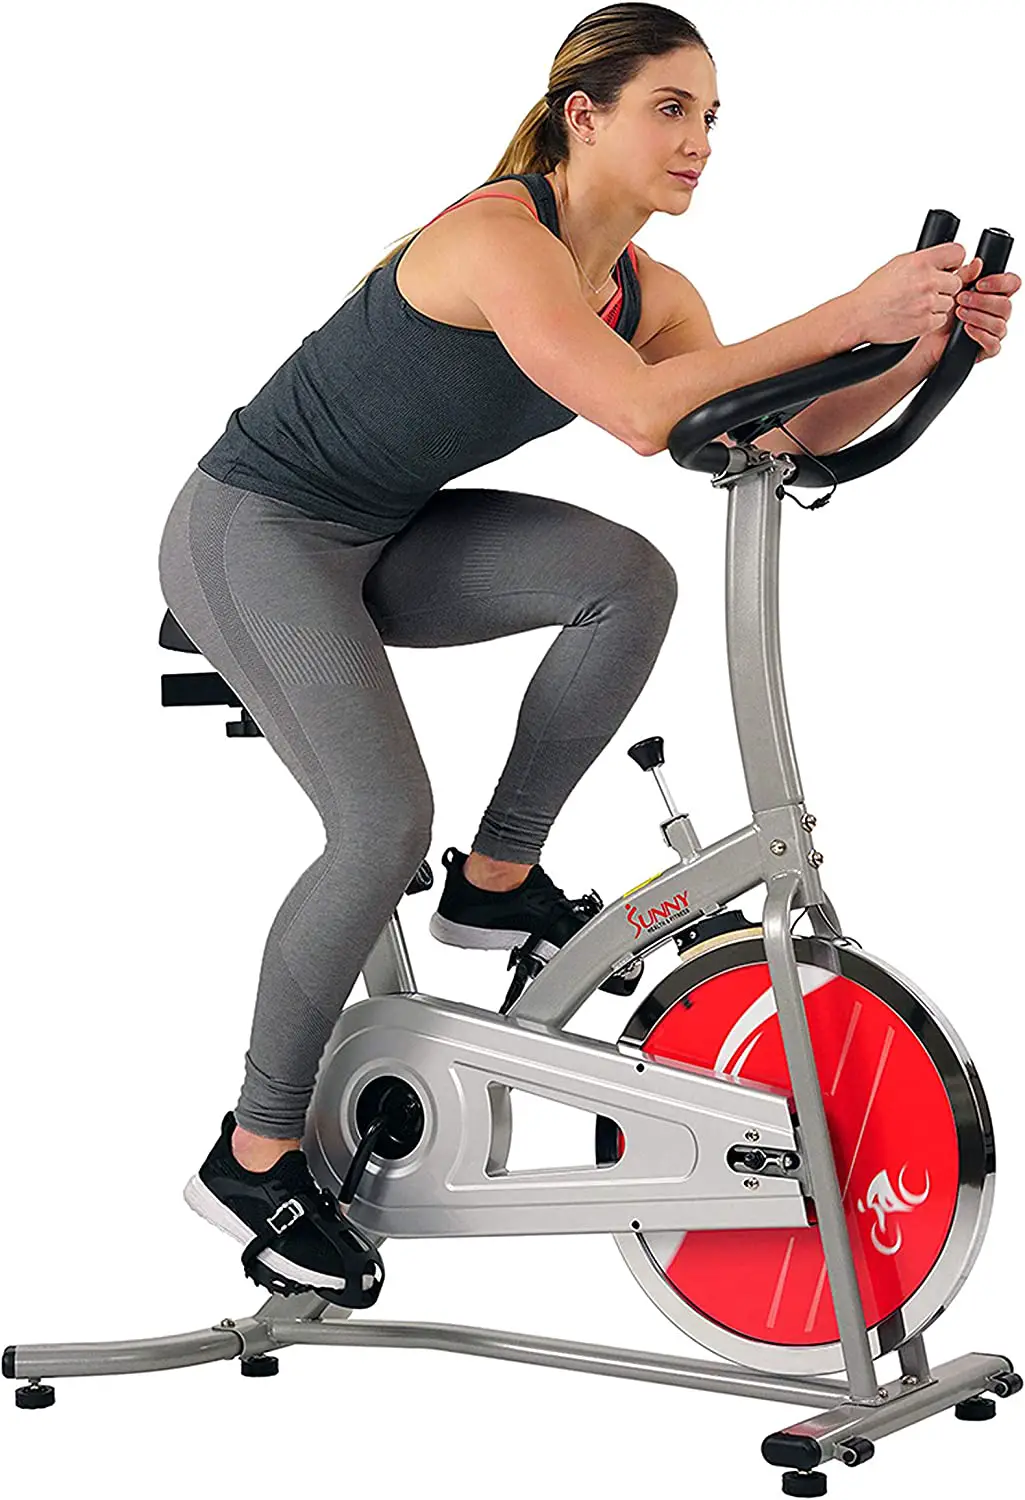 Is Riding a Stationary Bike Good for Lower Back Pain?